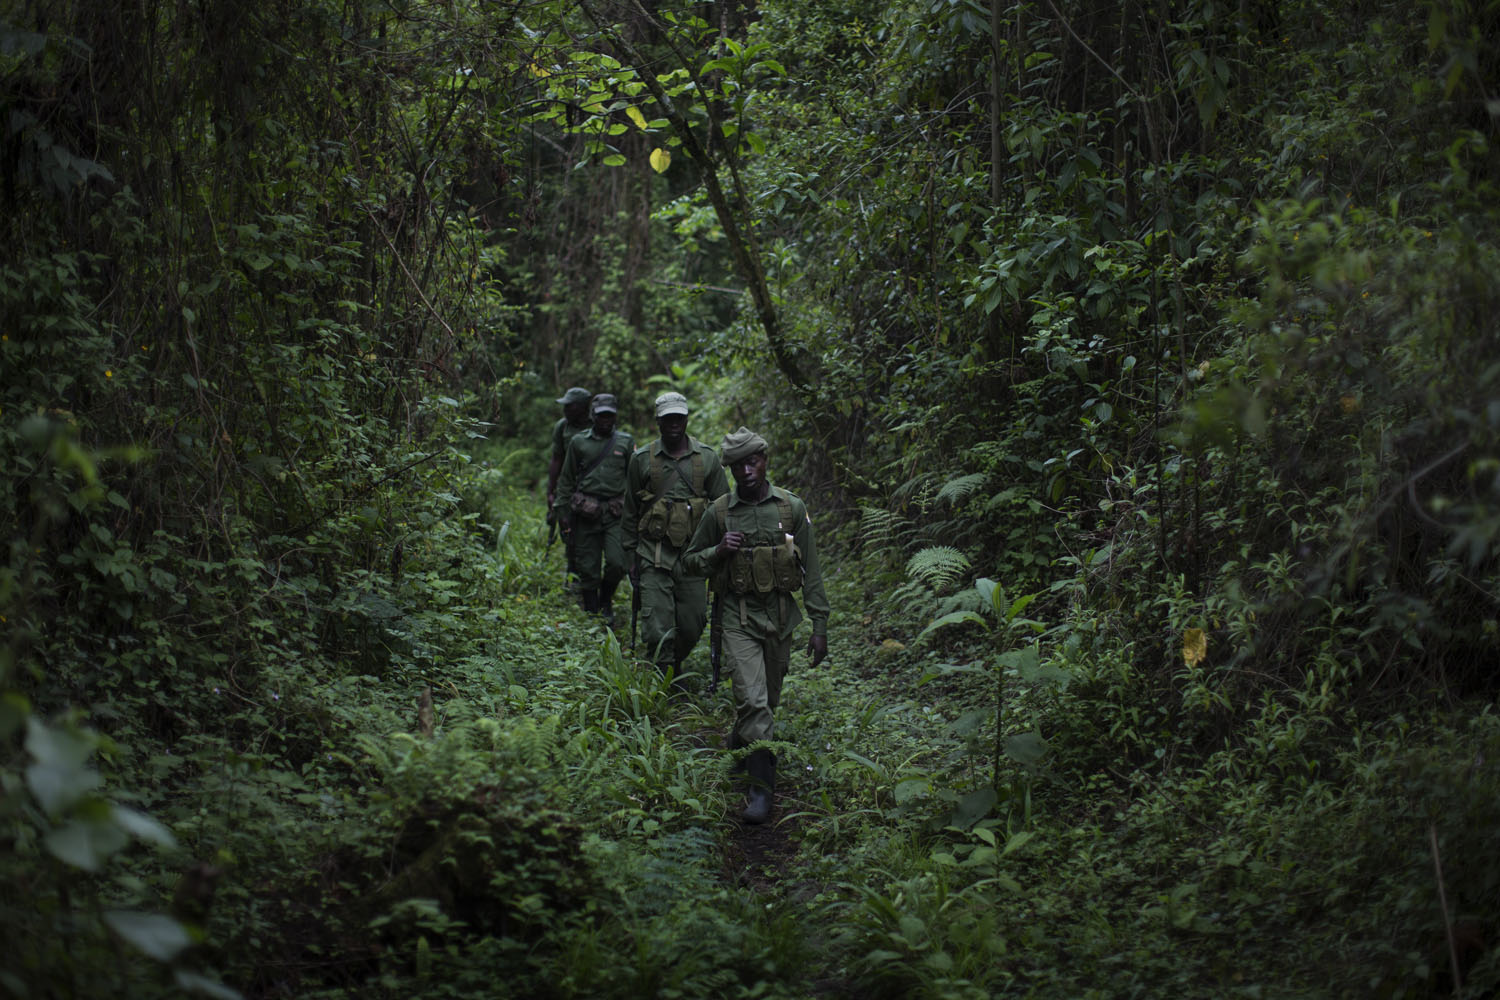 Park rangers hike down from their outpost on the Nyiragongo volcano in the Virunga National Park, where environmentalists are opposing oil drilling, in the Democratic Republic of Congo.